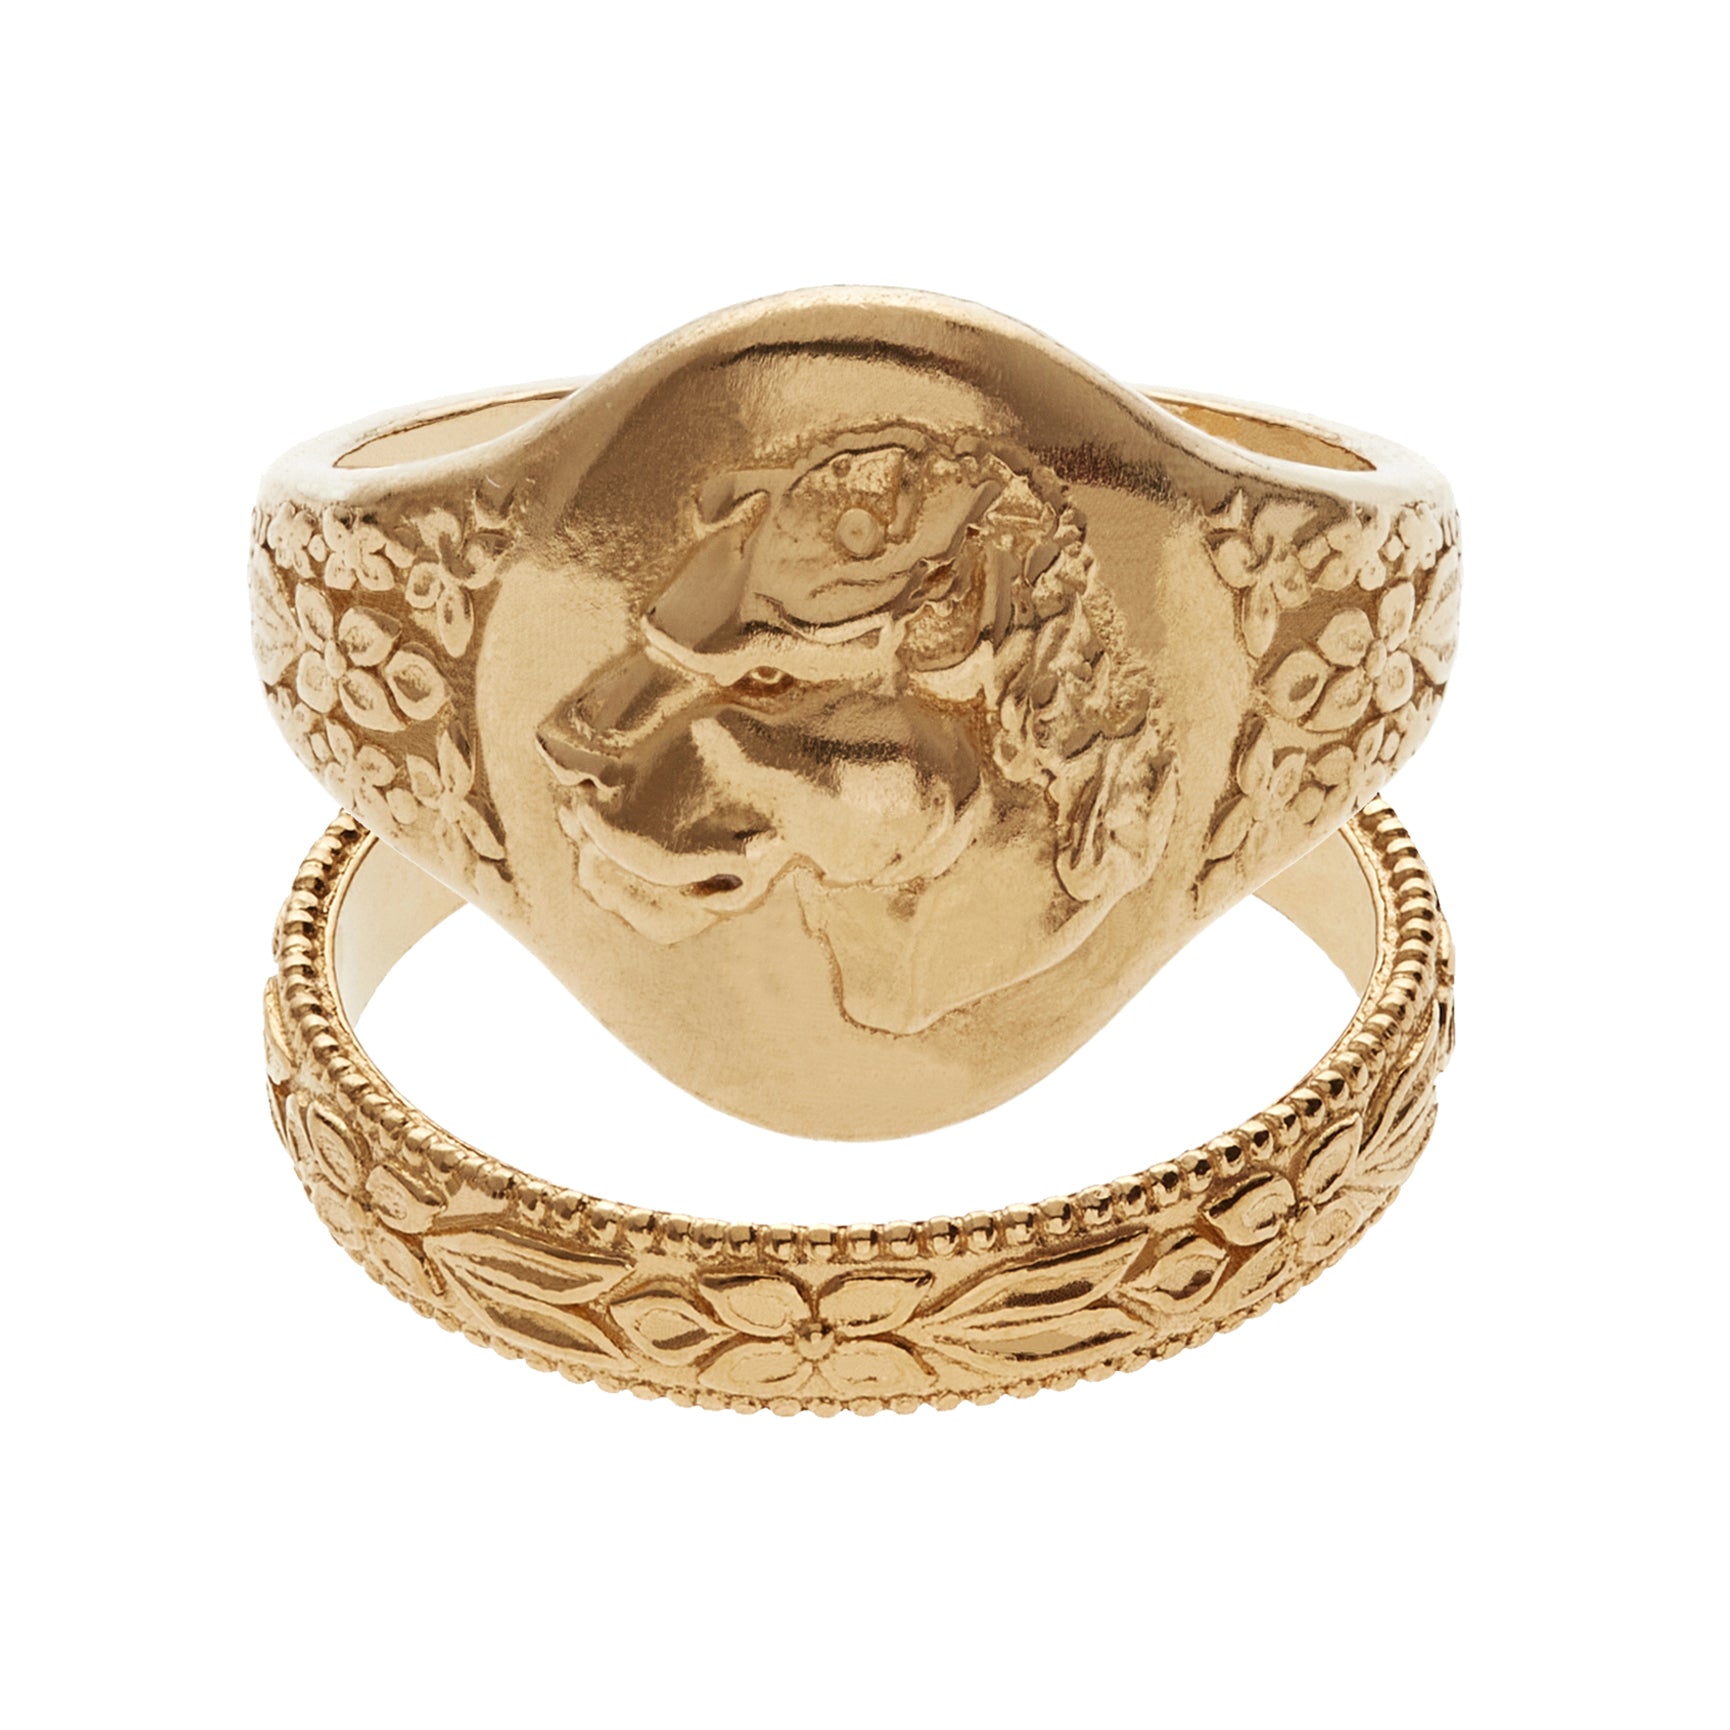 LIONESS SIGNET RING & FLOWER BAND RING